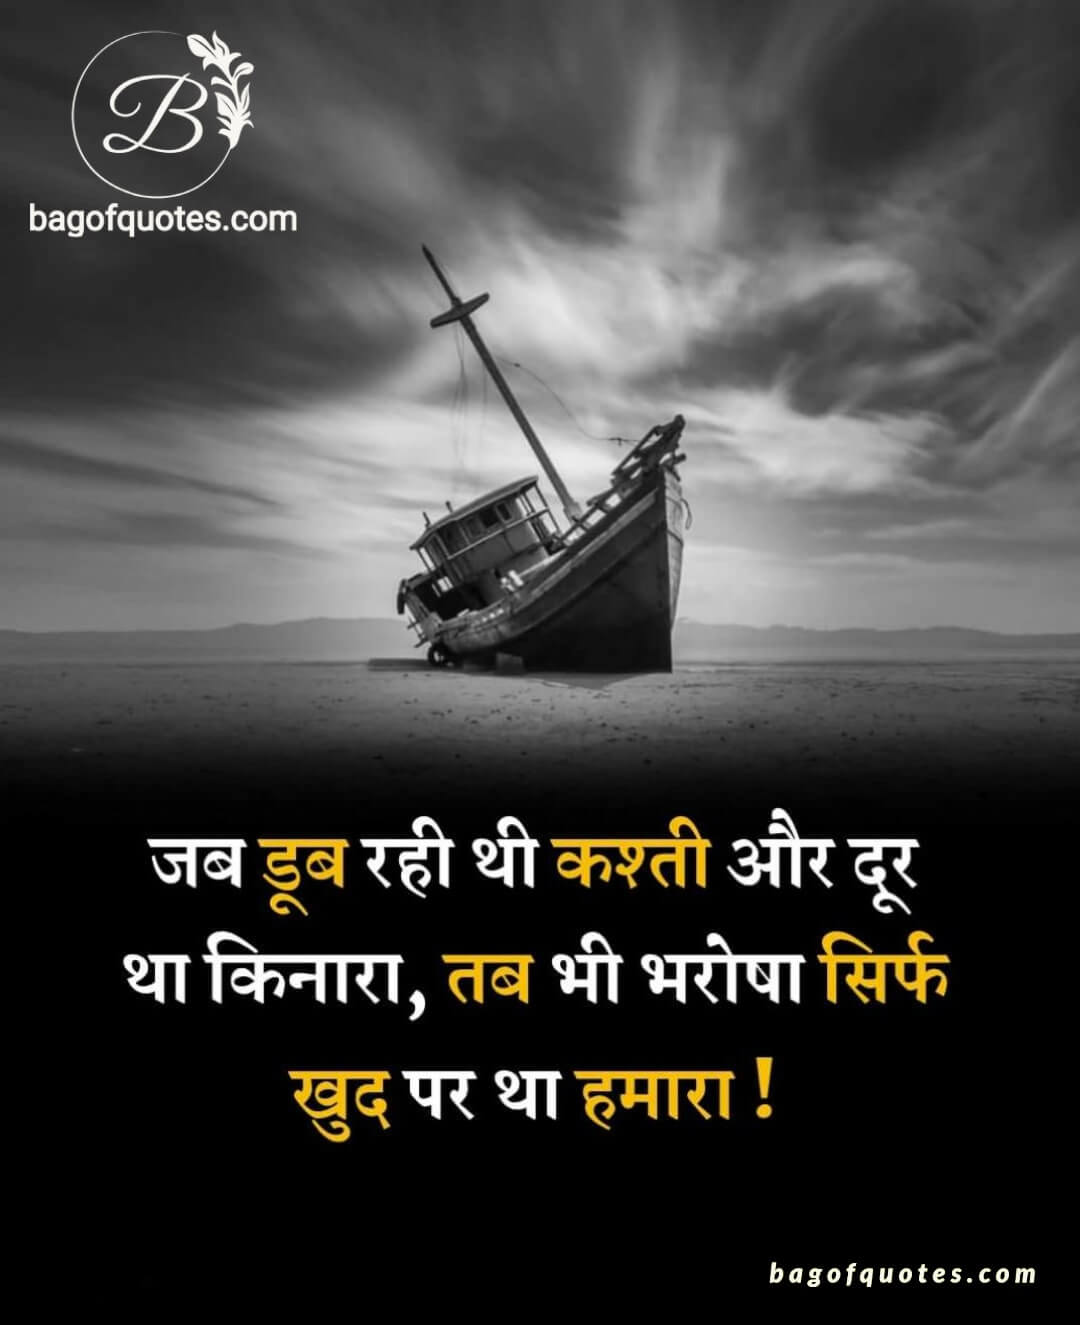 Motivational Quotes In Hindi14 